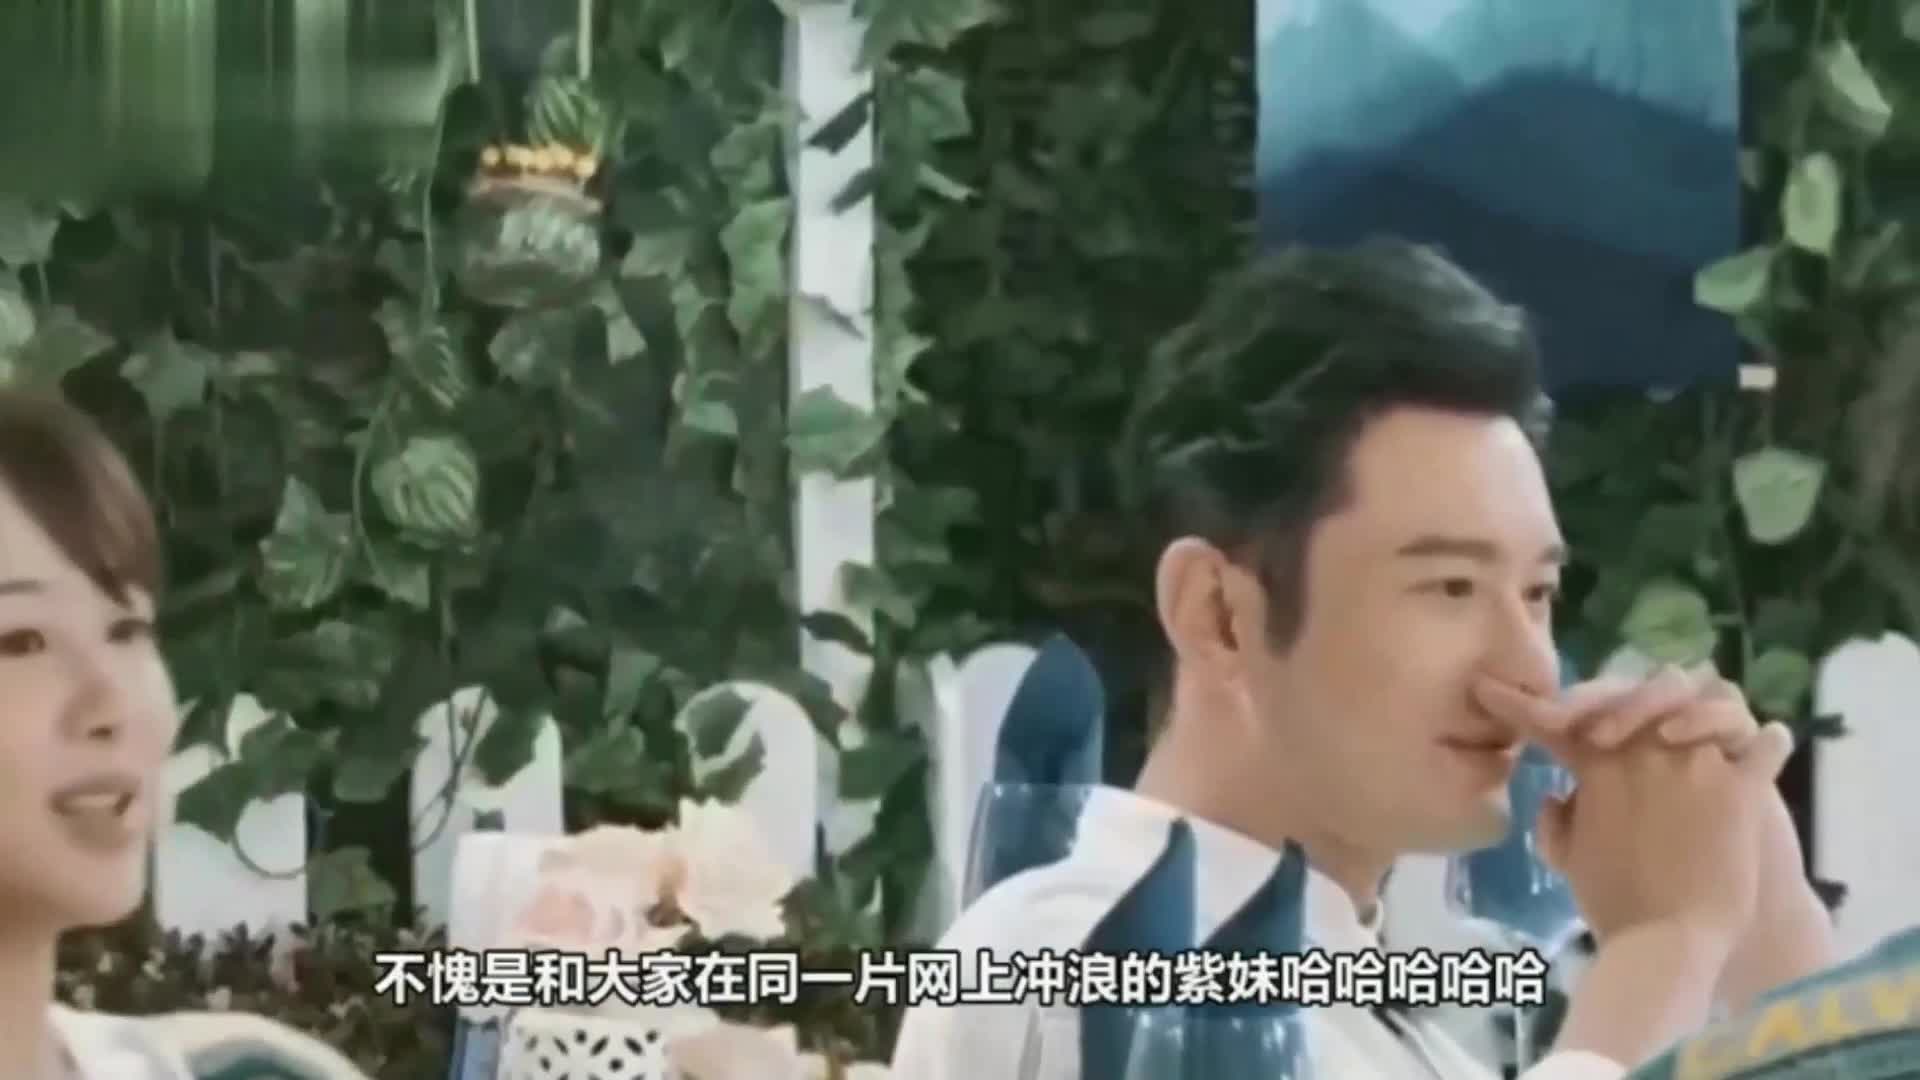 With Wang Junkai and Yang Zi surfing on the Internet, Huang Xiaoming is embarrassed.